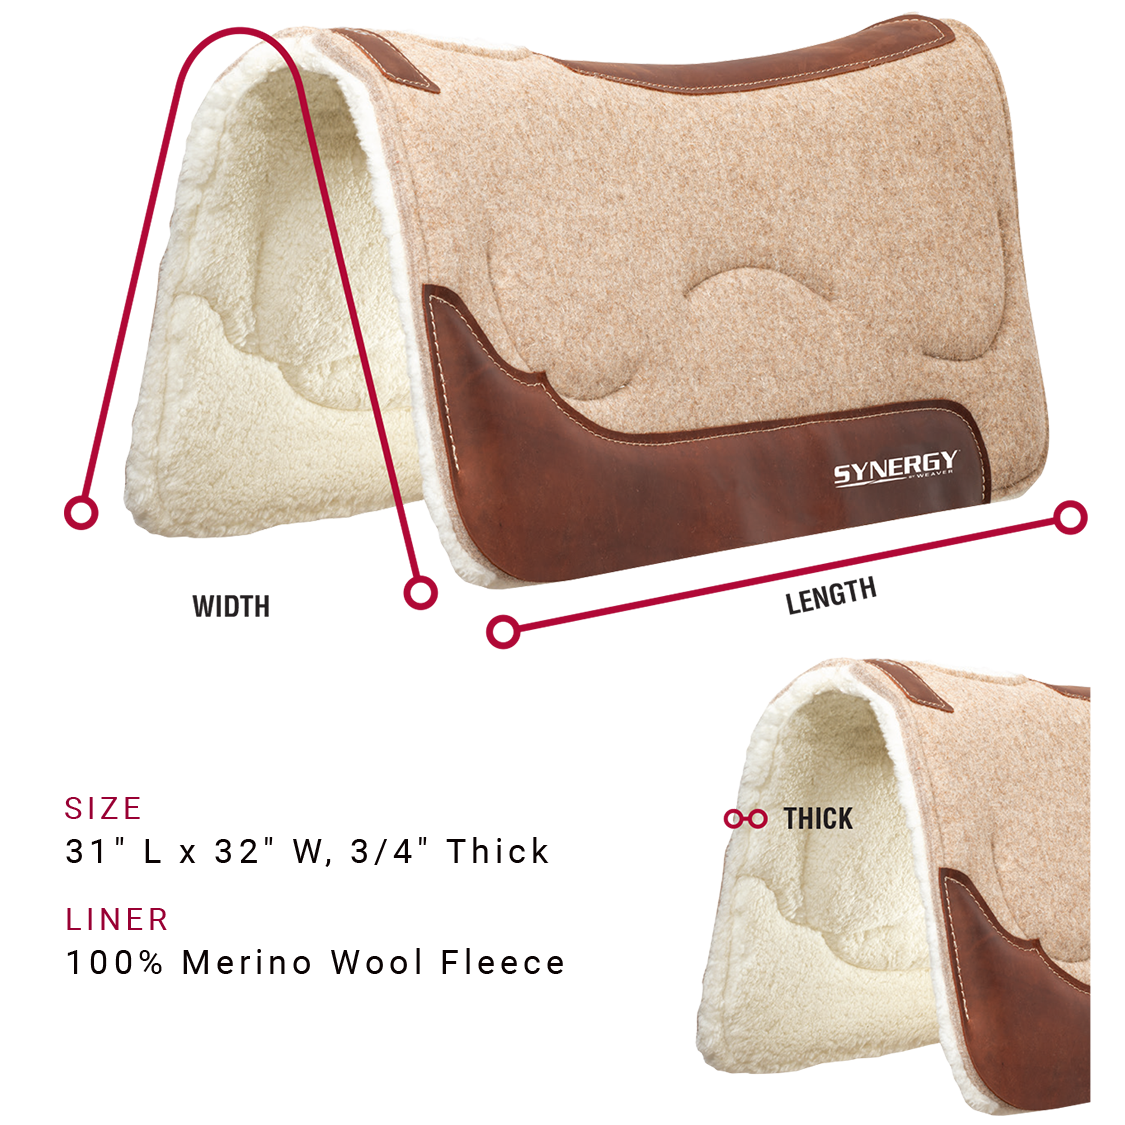 Saddle pad is available in the following sizes: 31 inches long by 32 inches wide, Three-fourths of an inch thick. Saddle pad is available with a 100% Merino Wool Fleece liner